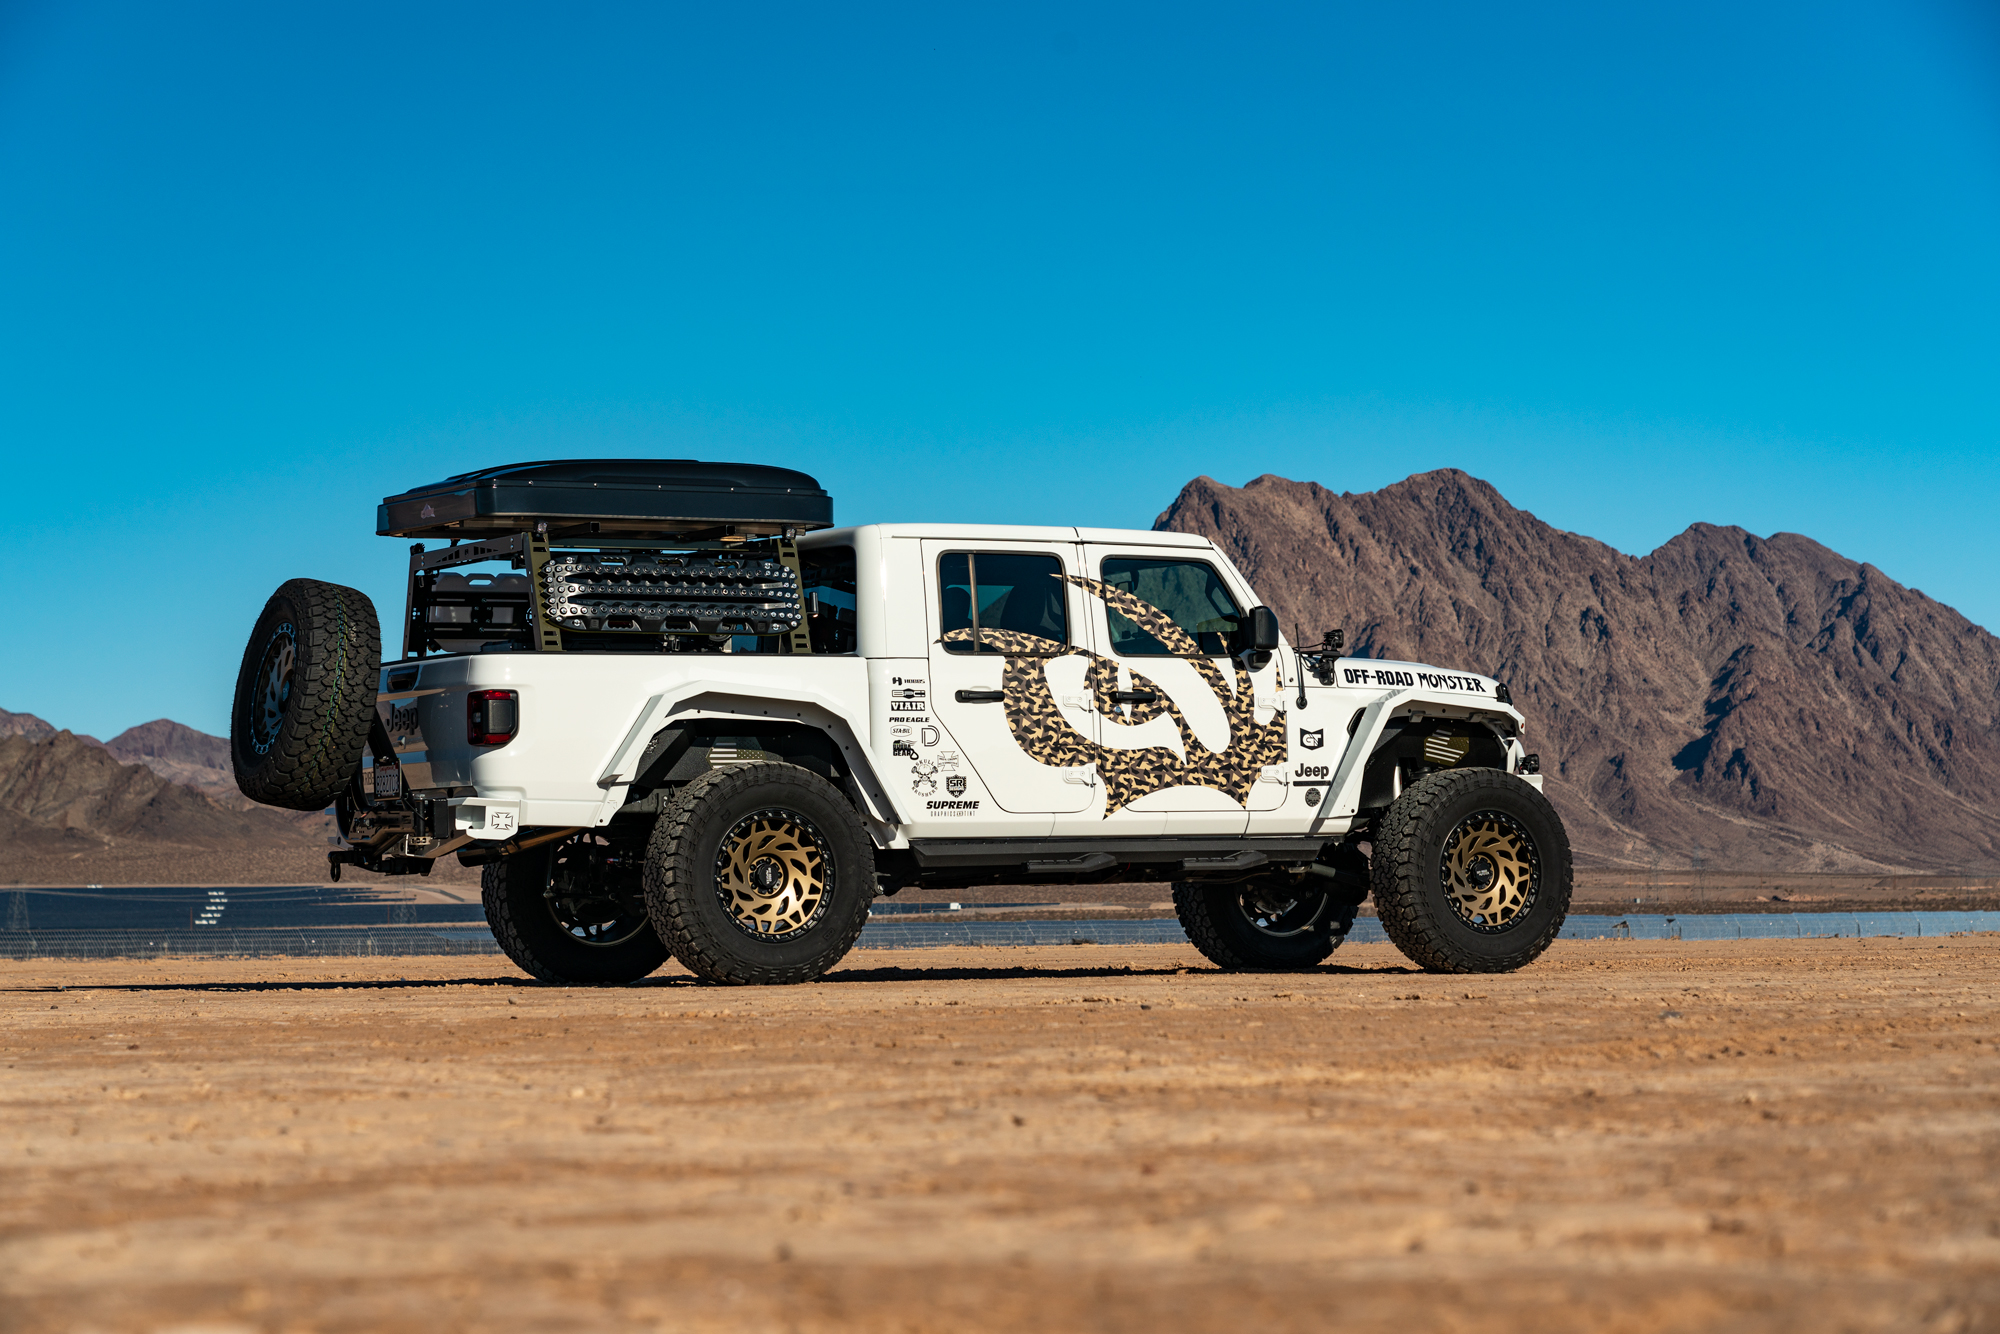 Off-Road Monster M50 Wheels on a SEMA build 2021 Jeep Gladiator